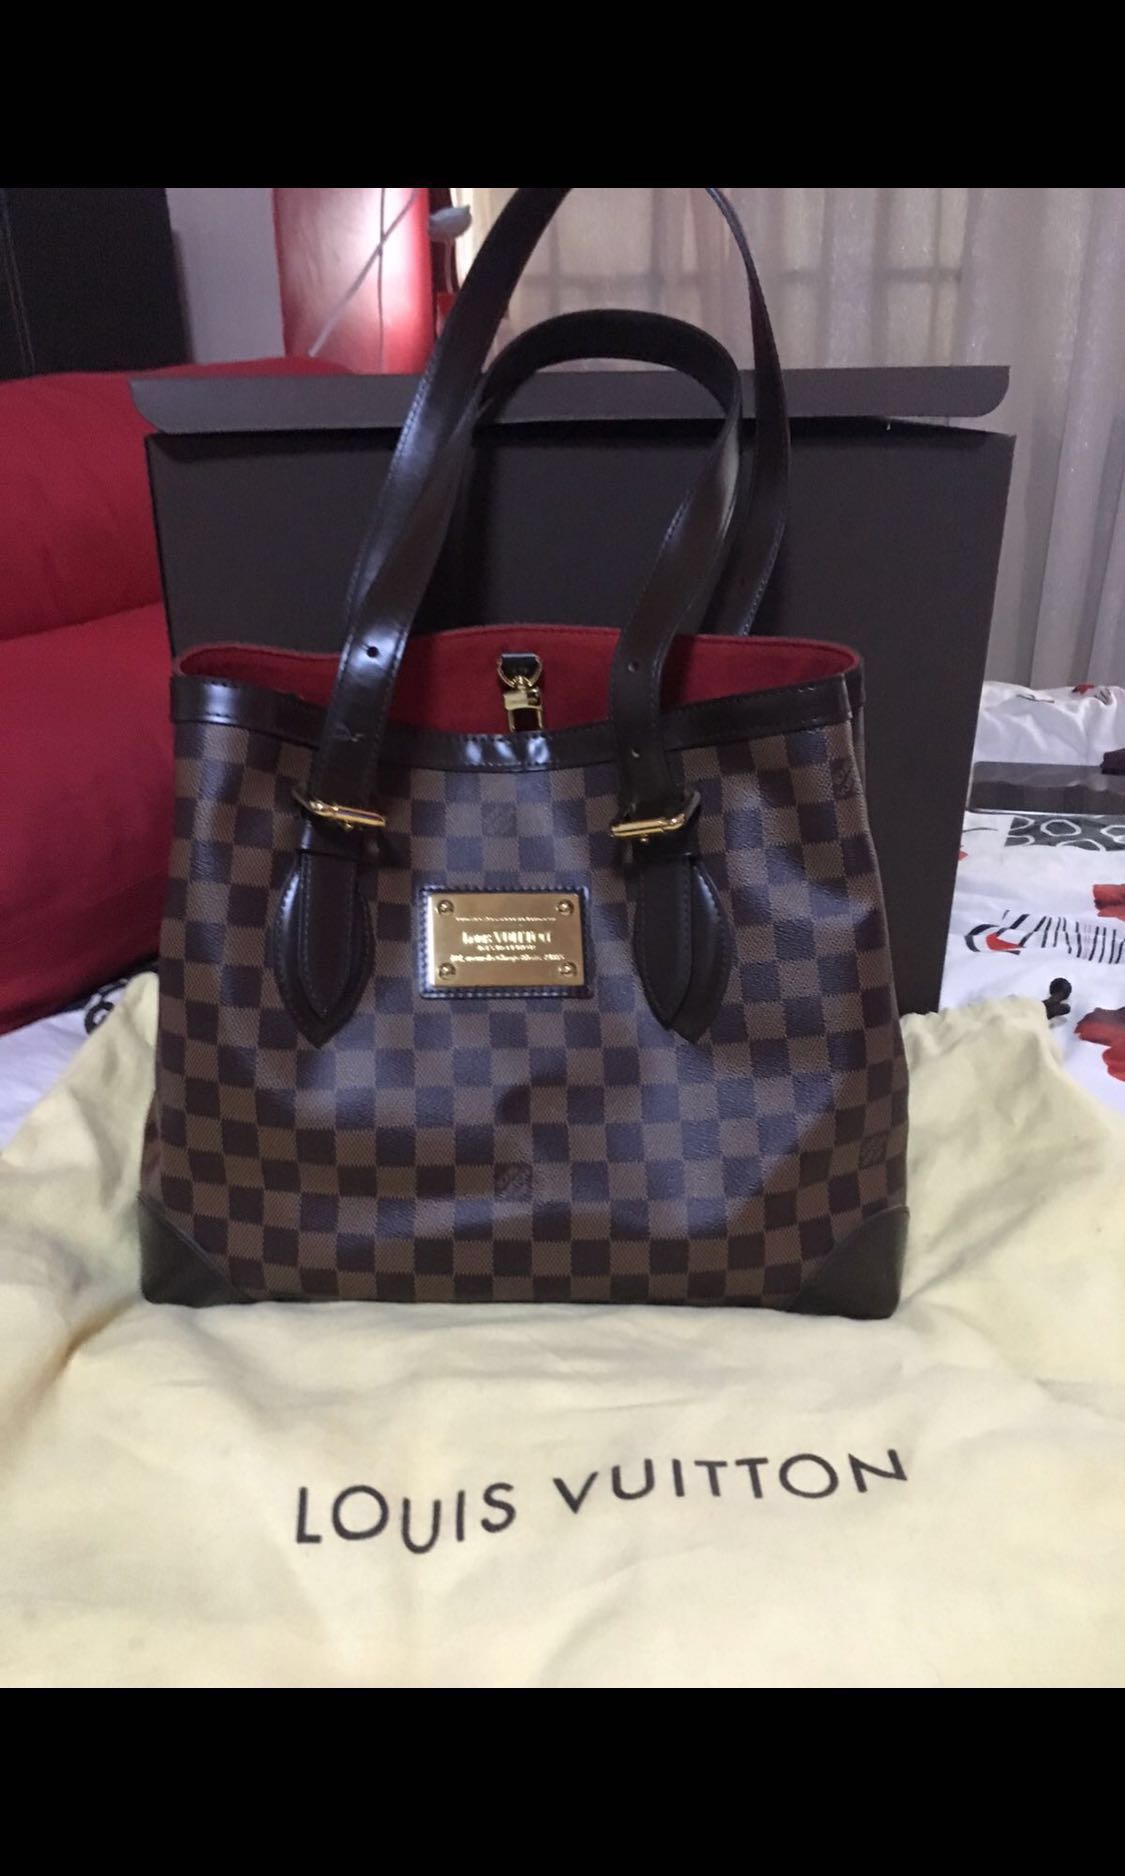 Louis Vuitton Bags Can You Buy Now Pay Later 20 Discount Code   Fashion For Lunch